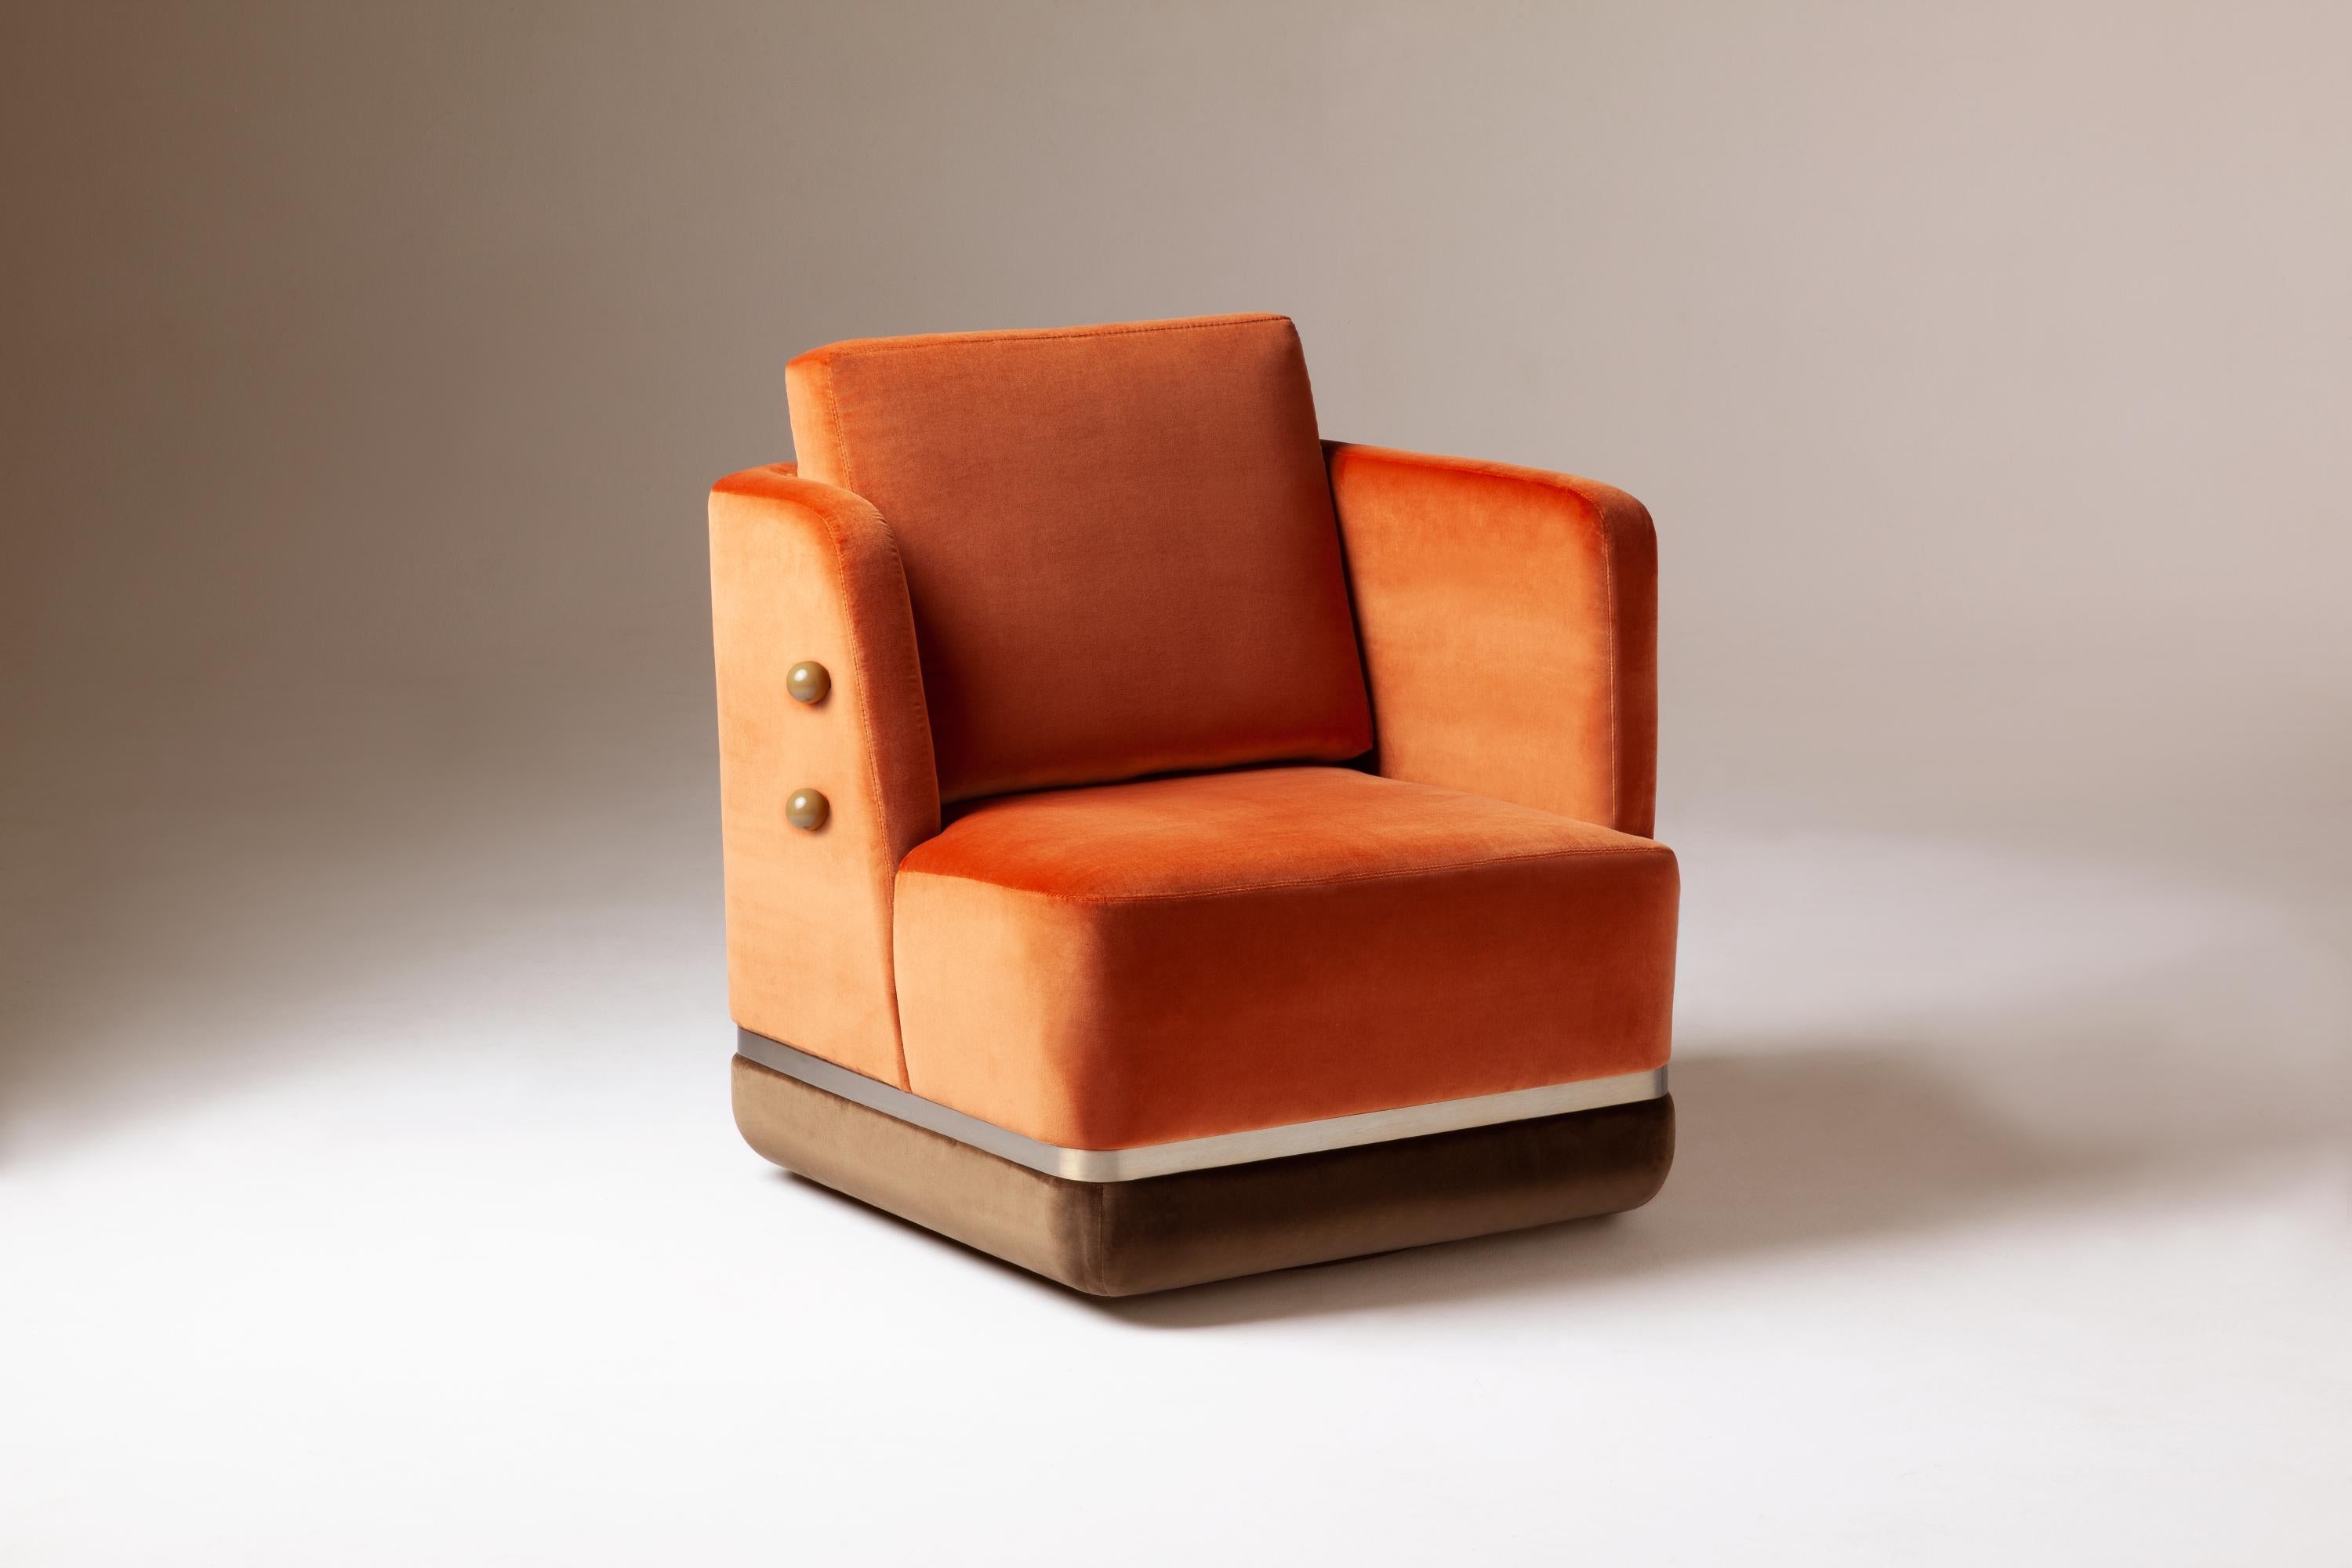 Portuguese Panorama Armchair by Dooq